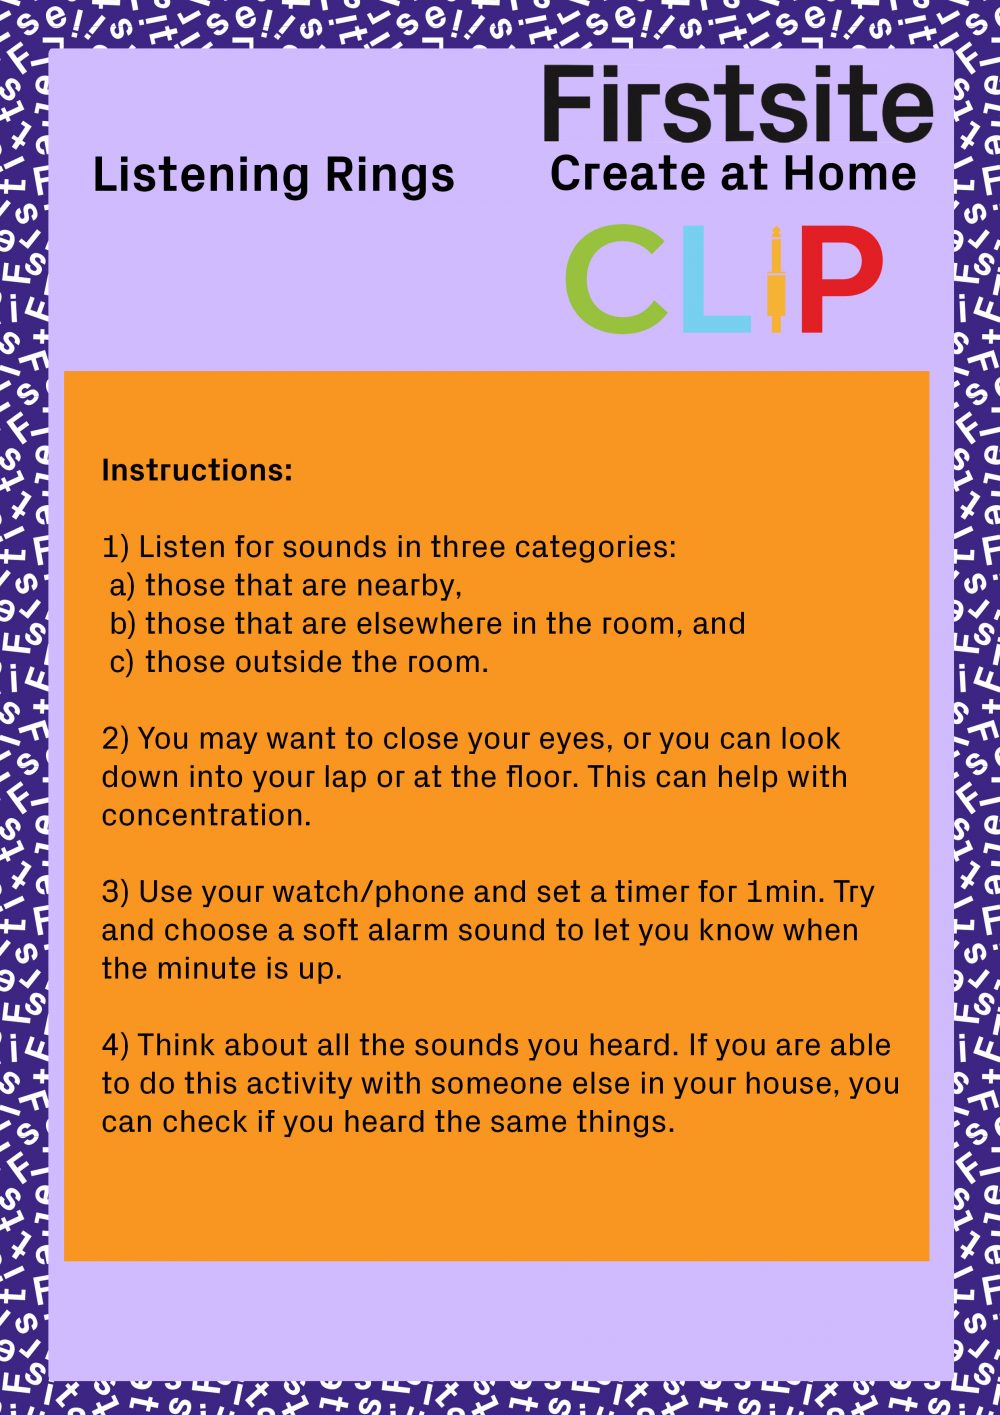 Firstsite Create at Home Listening Rings activity - instructions